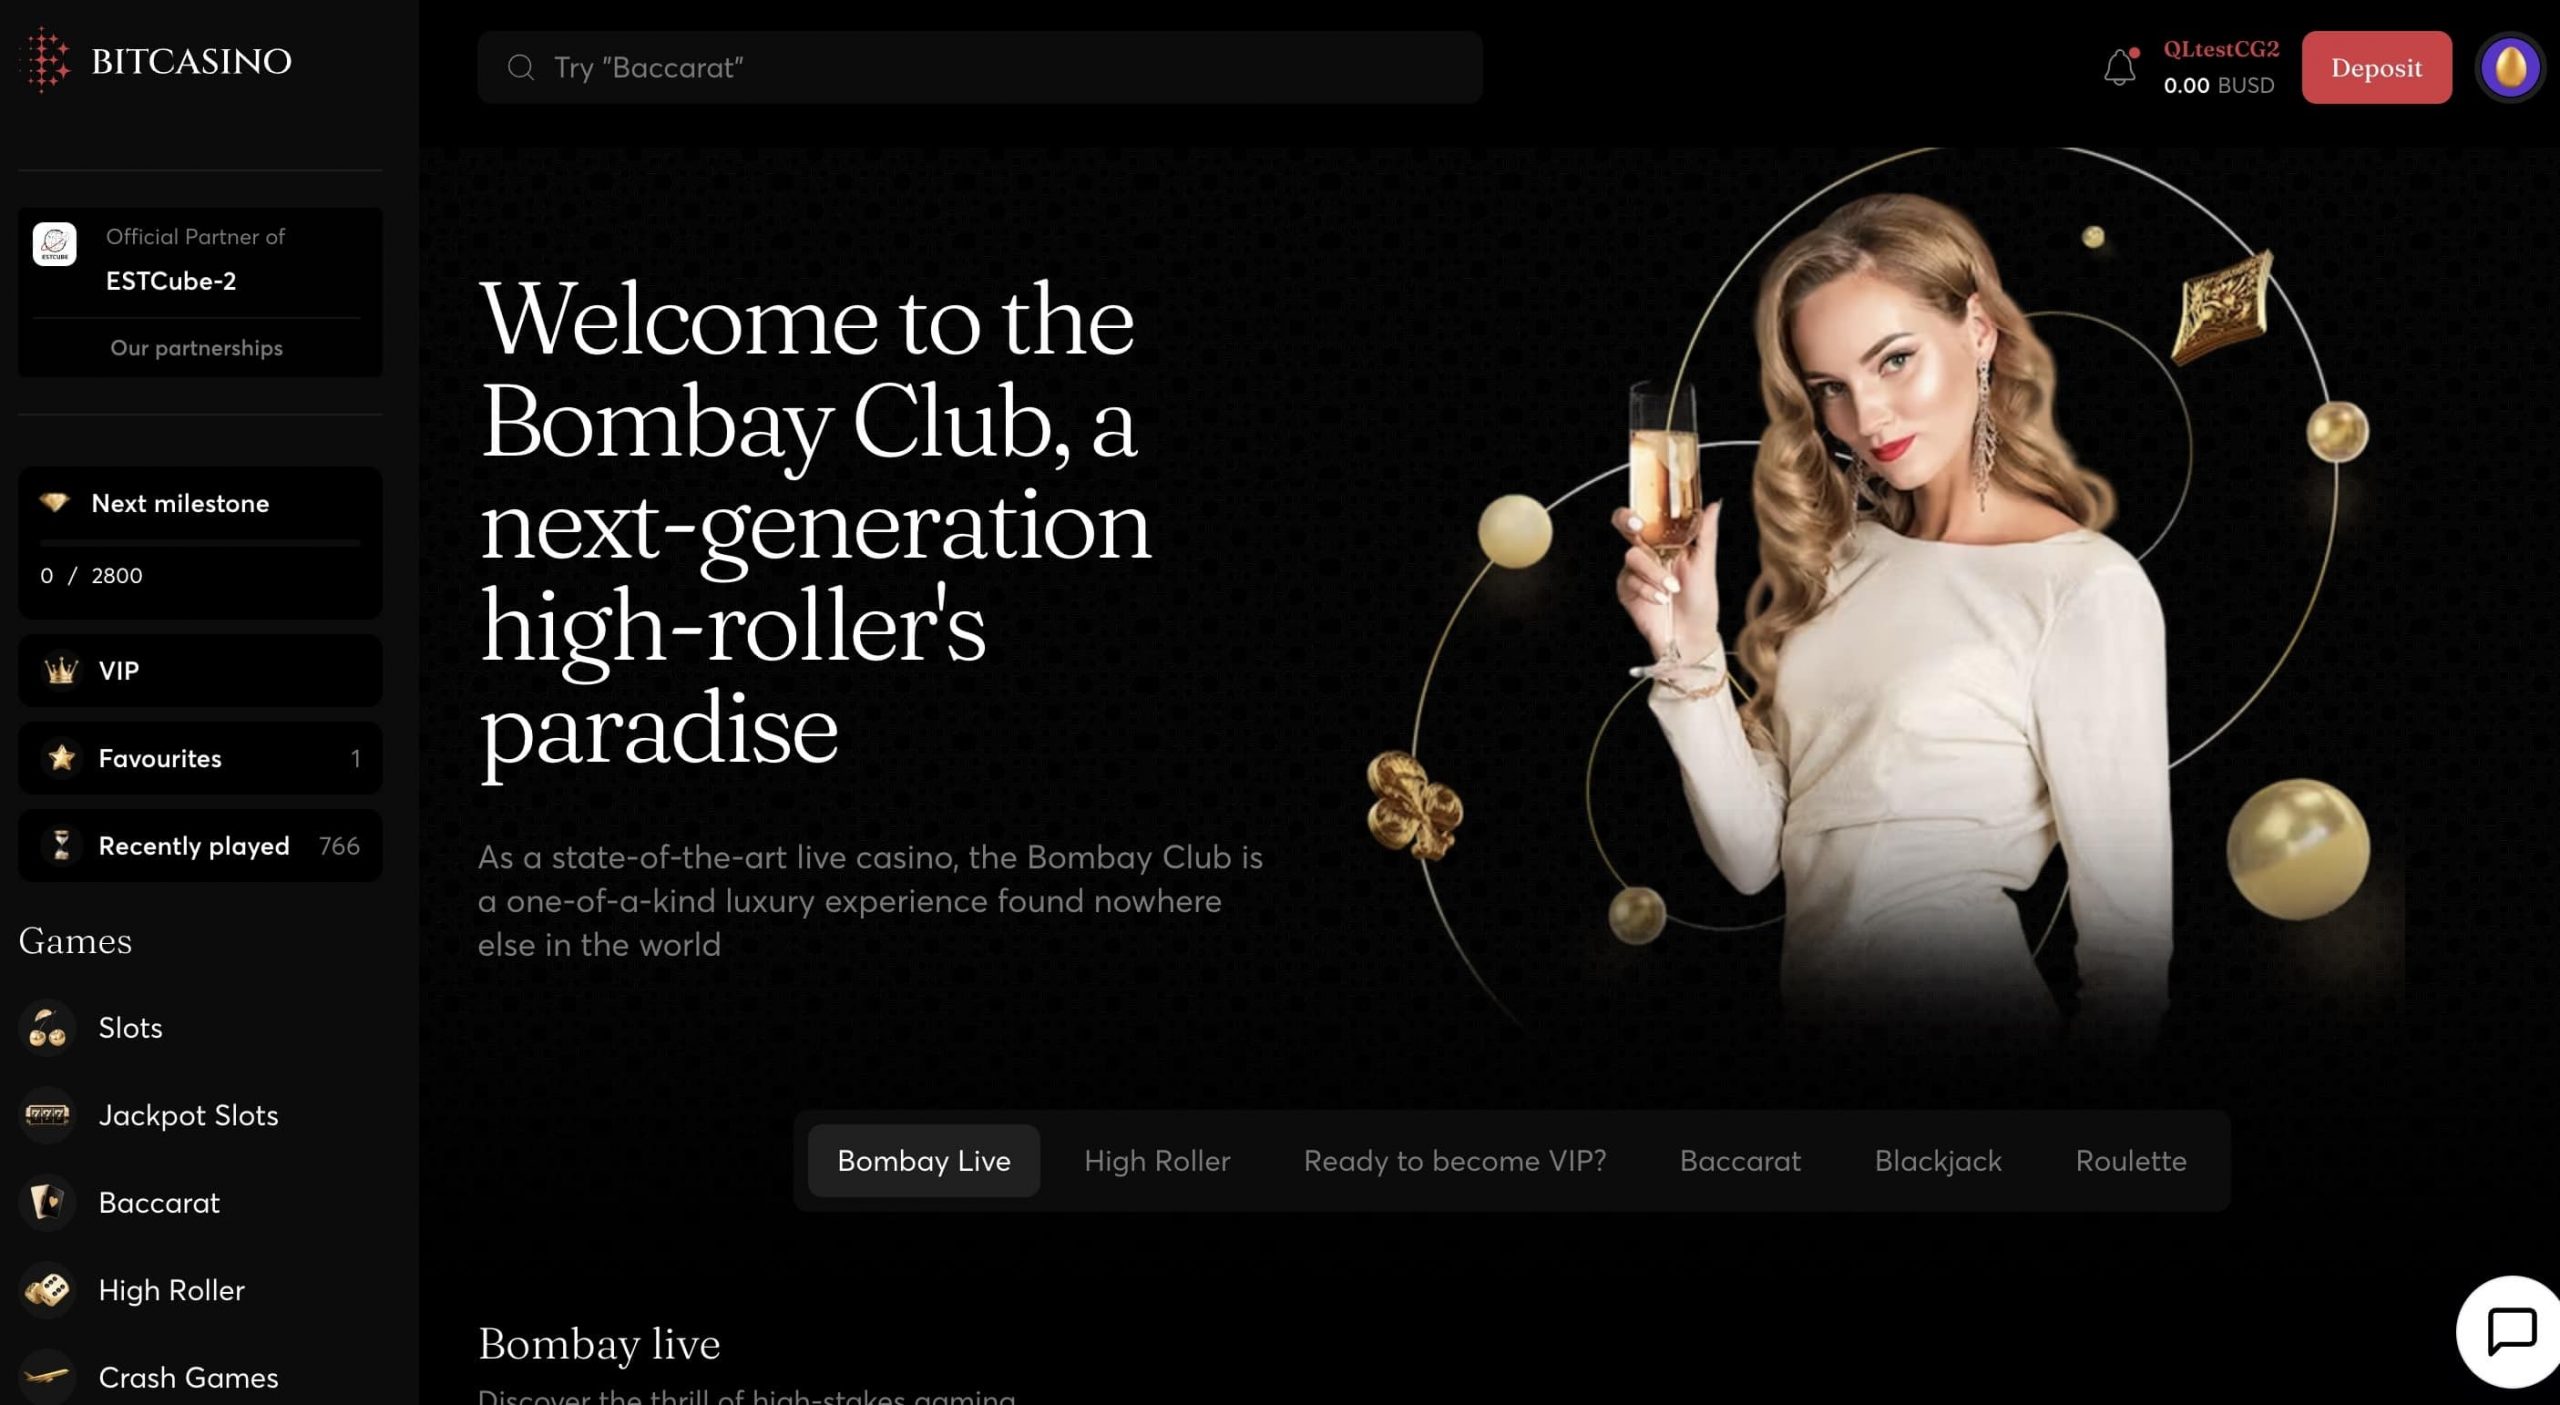 The new Bitcasino: A lucrative platform for high rollers worldwide